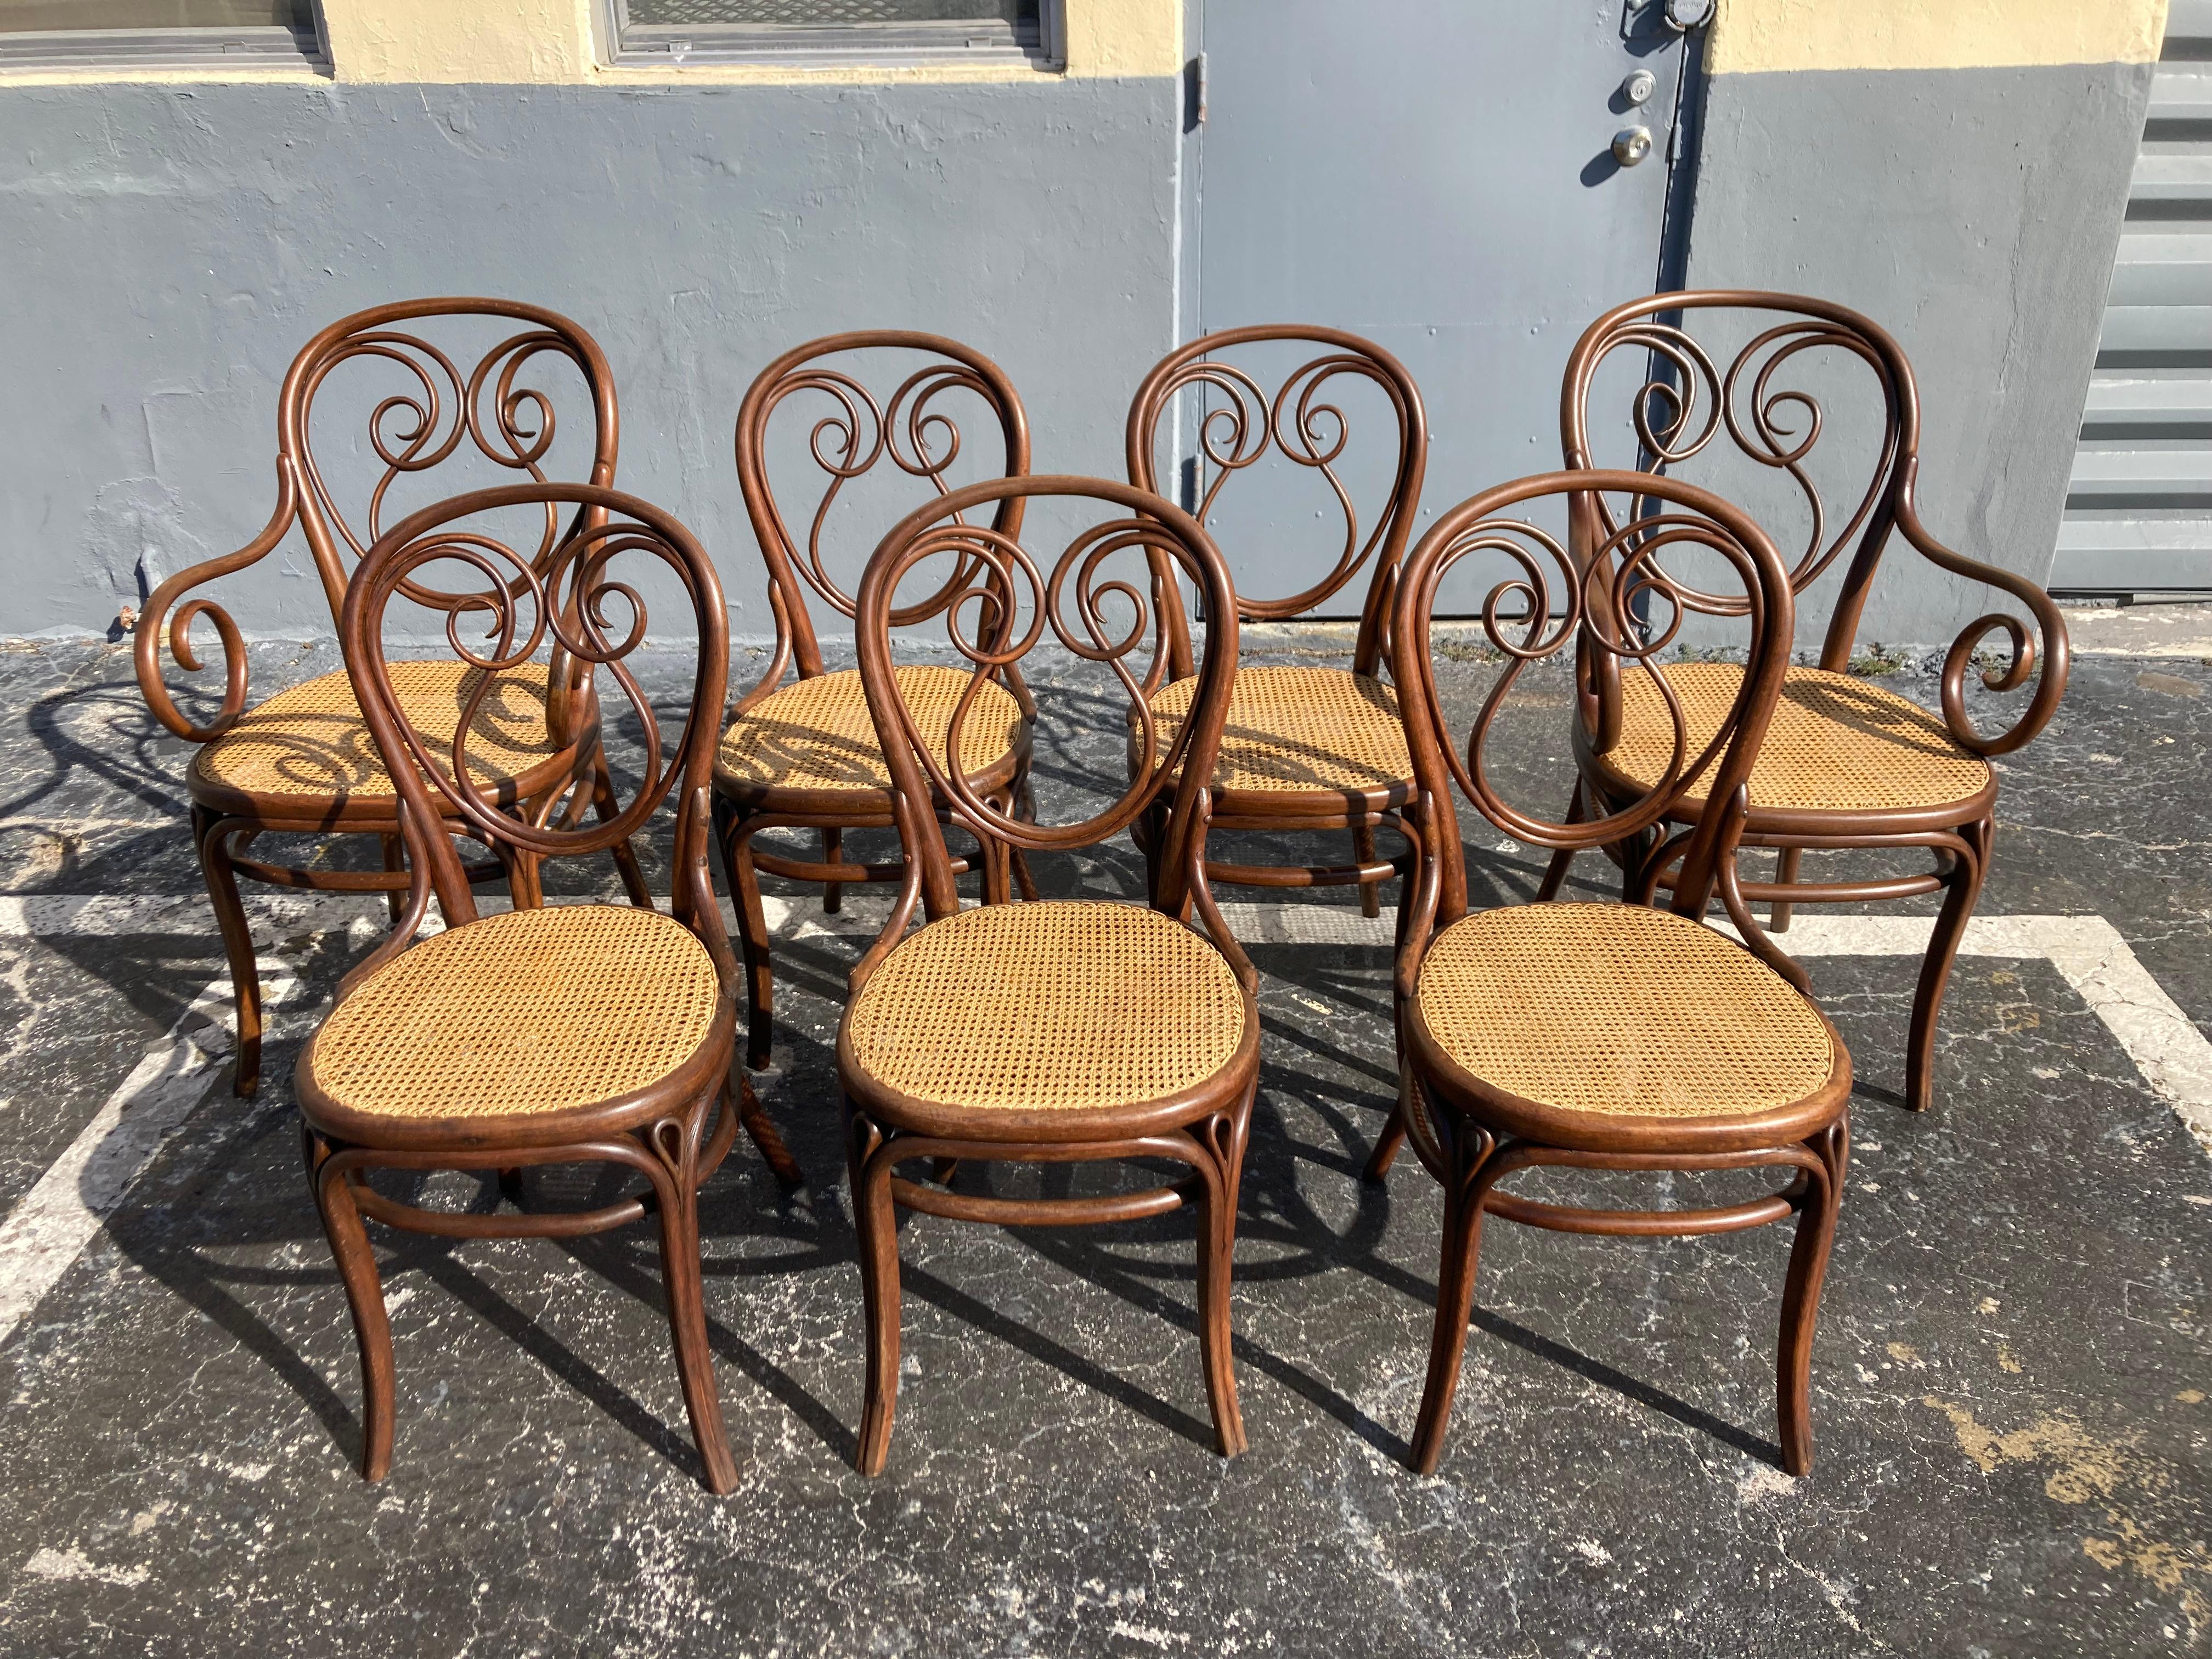 Rare Set of Thonet Chairs Model 13, Bentwood and Cane In Good Condition For Sale In Miami, FL